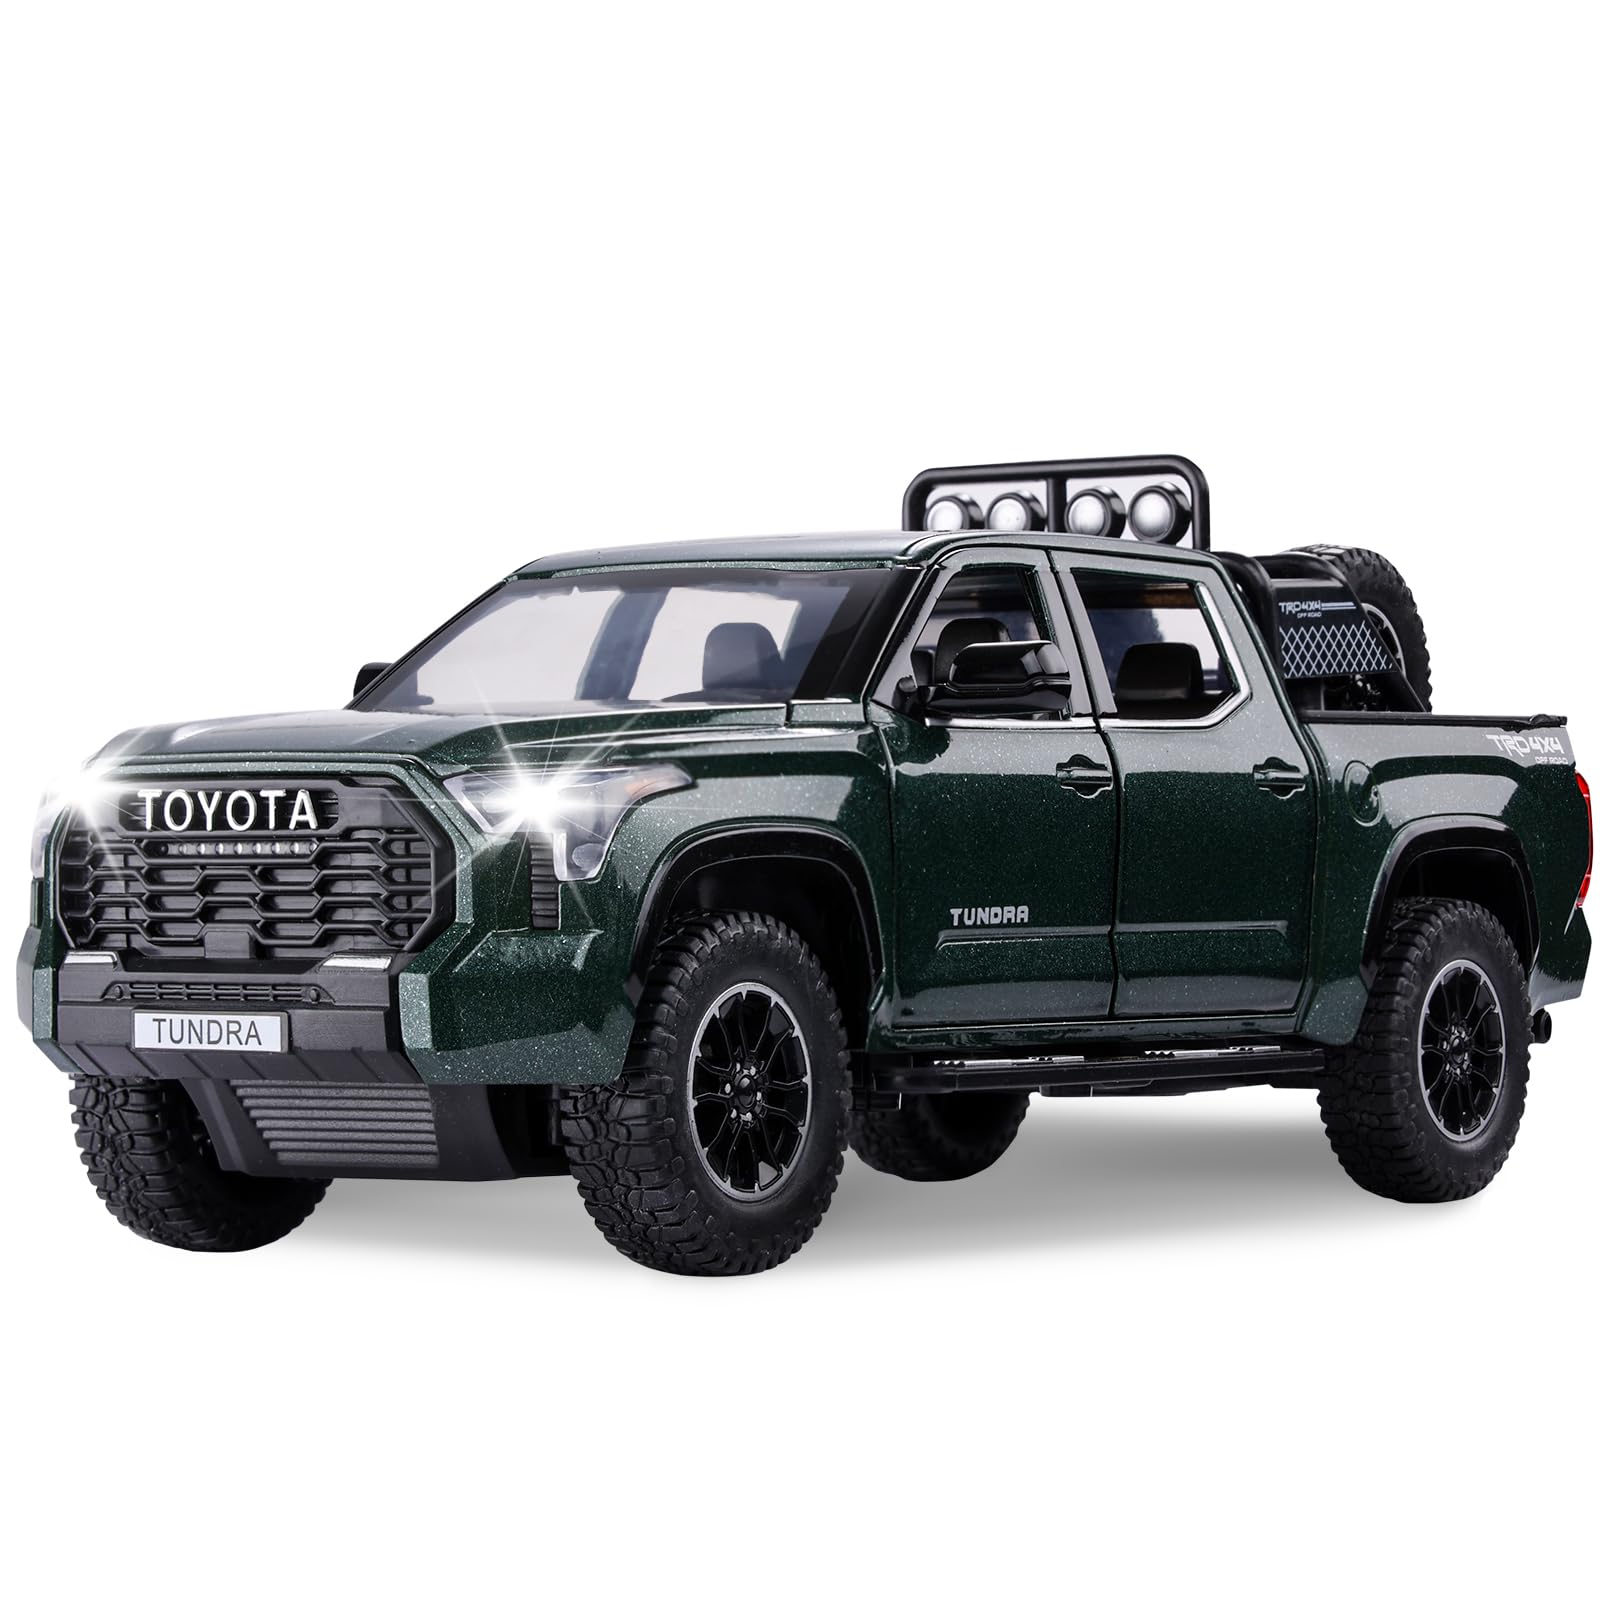 SASBSC Tundra Truck Toys for 3 4 5 6 7 Year Old Boys Off-Road Pickup Toy Trucks for Boys Age 3-5 Diecast Metal Trucks with Light and Sound Pull Back Toy Cars Birthday Gift for Kids Green